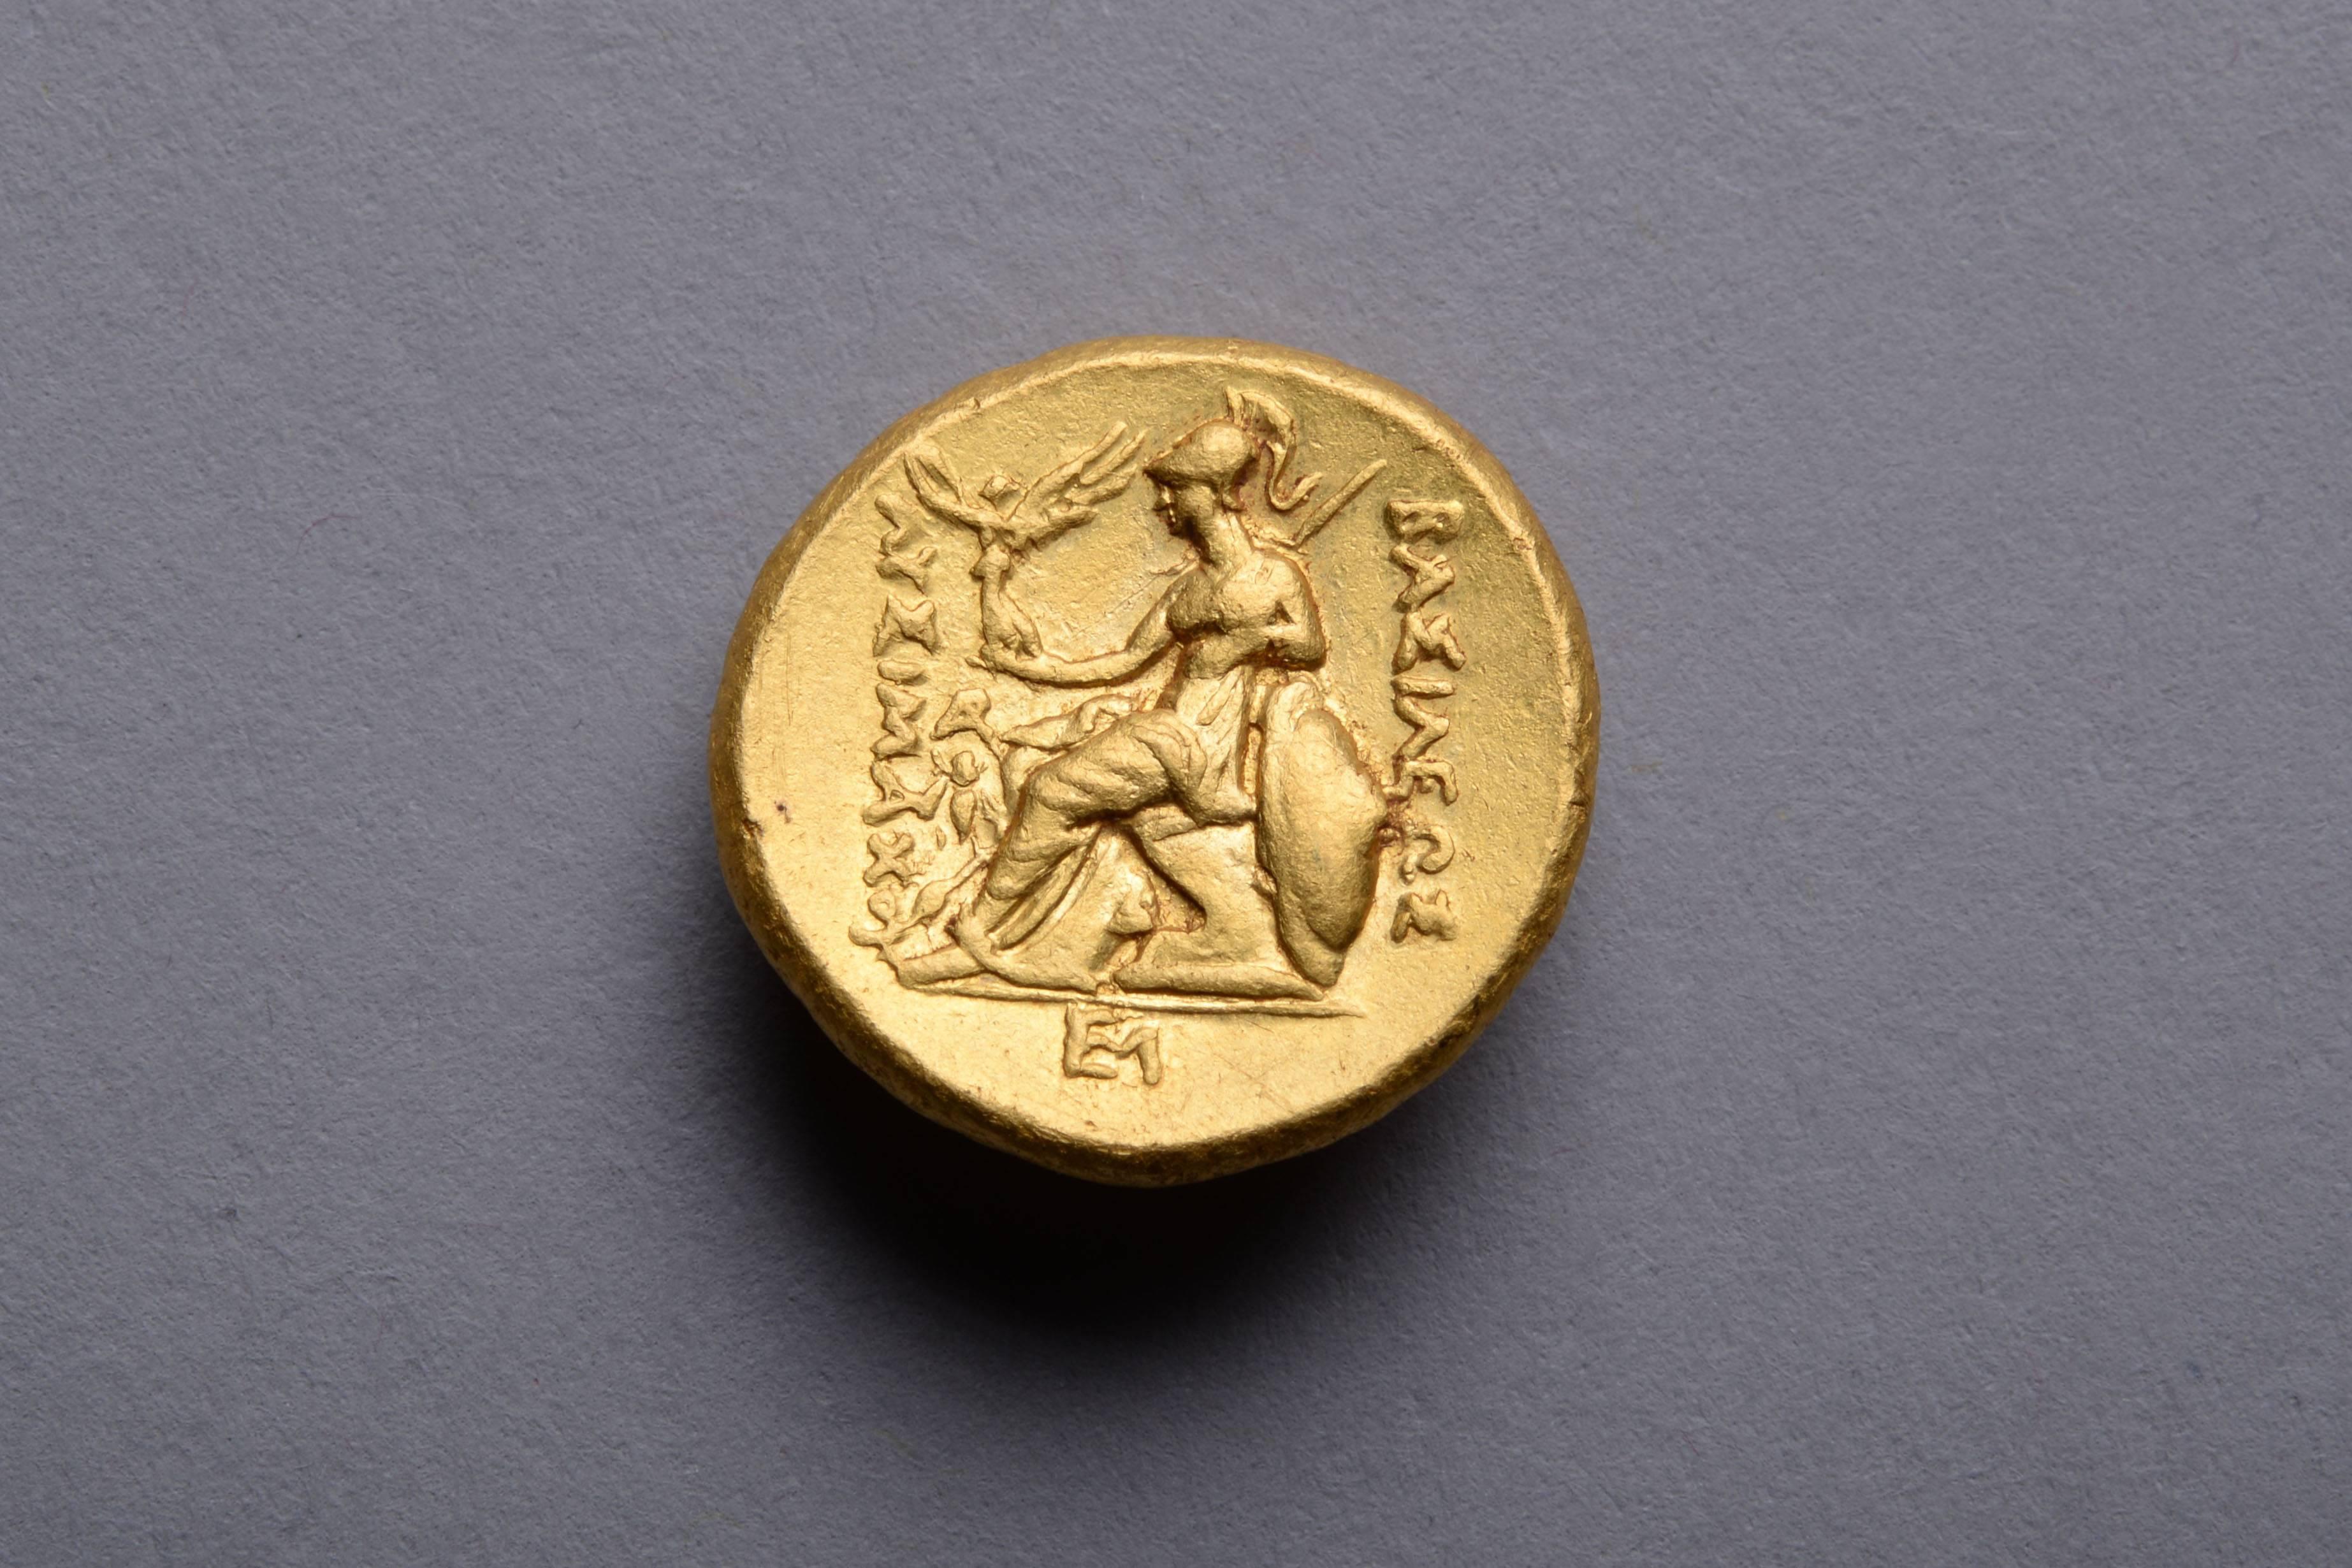 A beautiful, well centred and fine style example of a historically fascinating coin type. This gold stater, minted under King Lysimachos, depicts one of the earliest known portraits of Alexander the Great, in Fine Hellenistic style. Struck at the